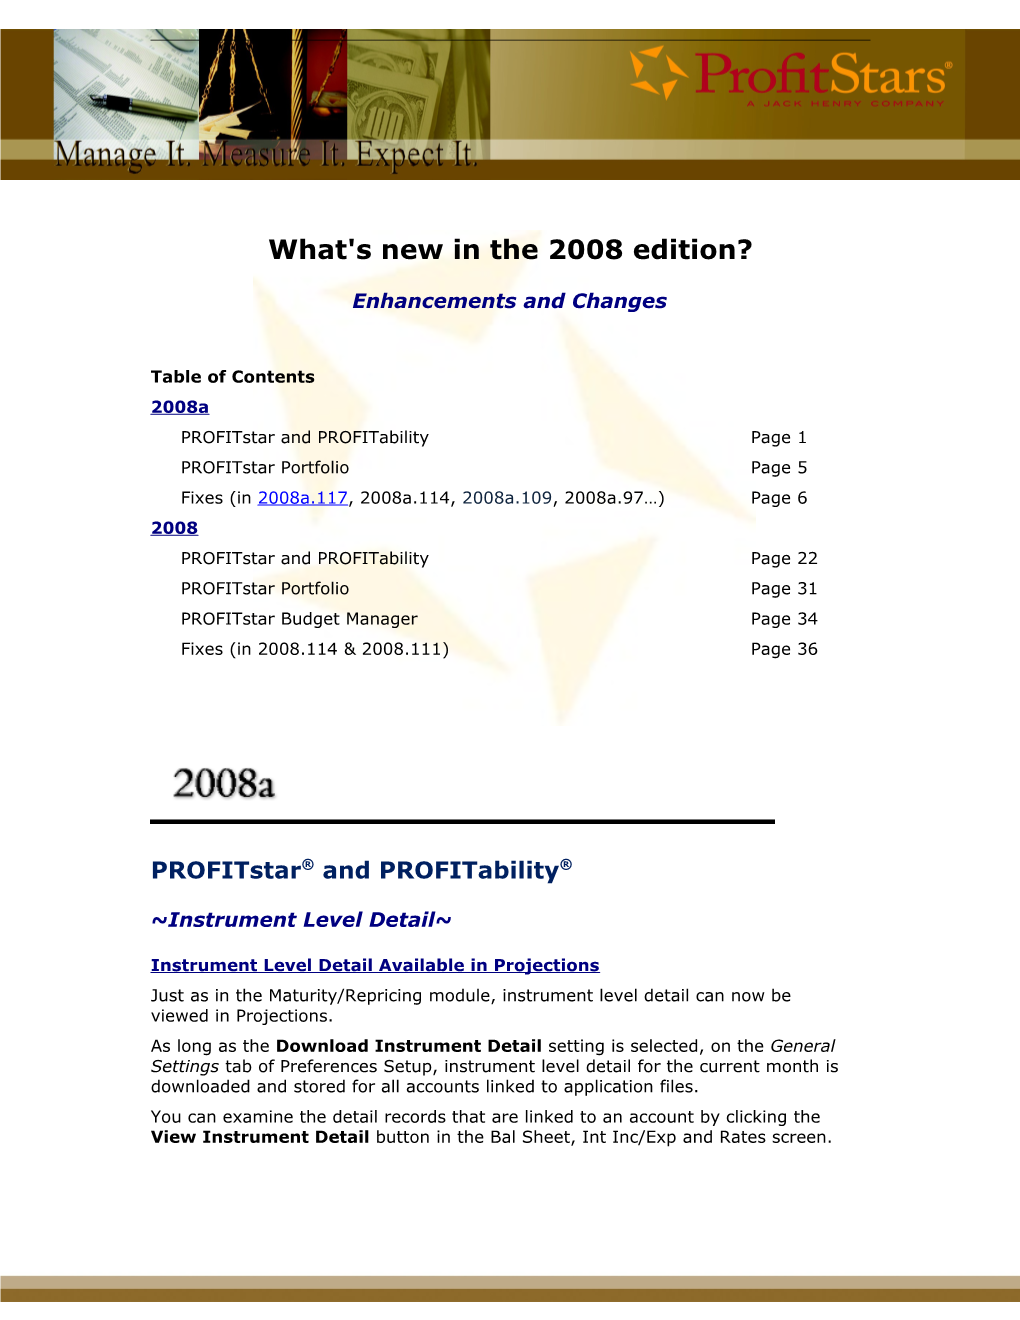 What's New in the 2008 Edition?